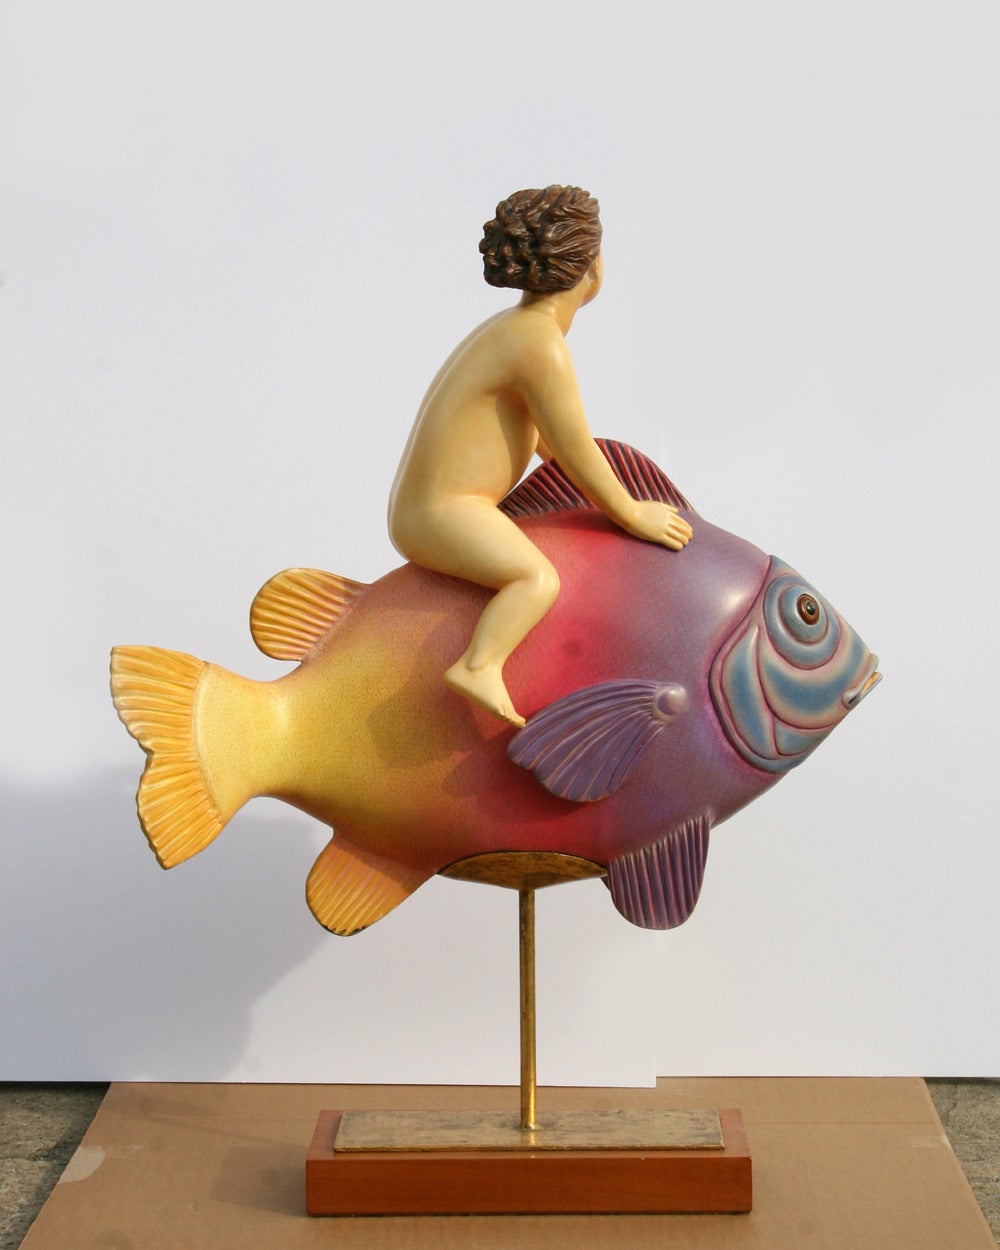 A resin sculpture by Sergio Bustamante from 1987. A piece from Bustamante's animal sculpture period in which his whimsical style is portrayed in fantasy-like animal figures. 

Artist: Sergio Bustamante, Mexican
Title:	Flying Fish with Boy
Year: 1987